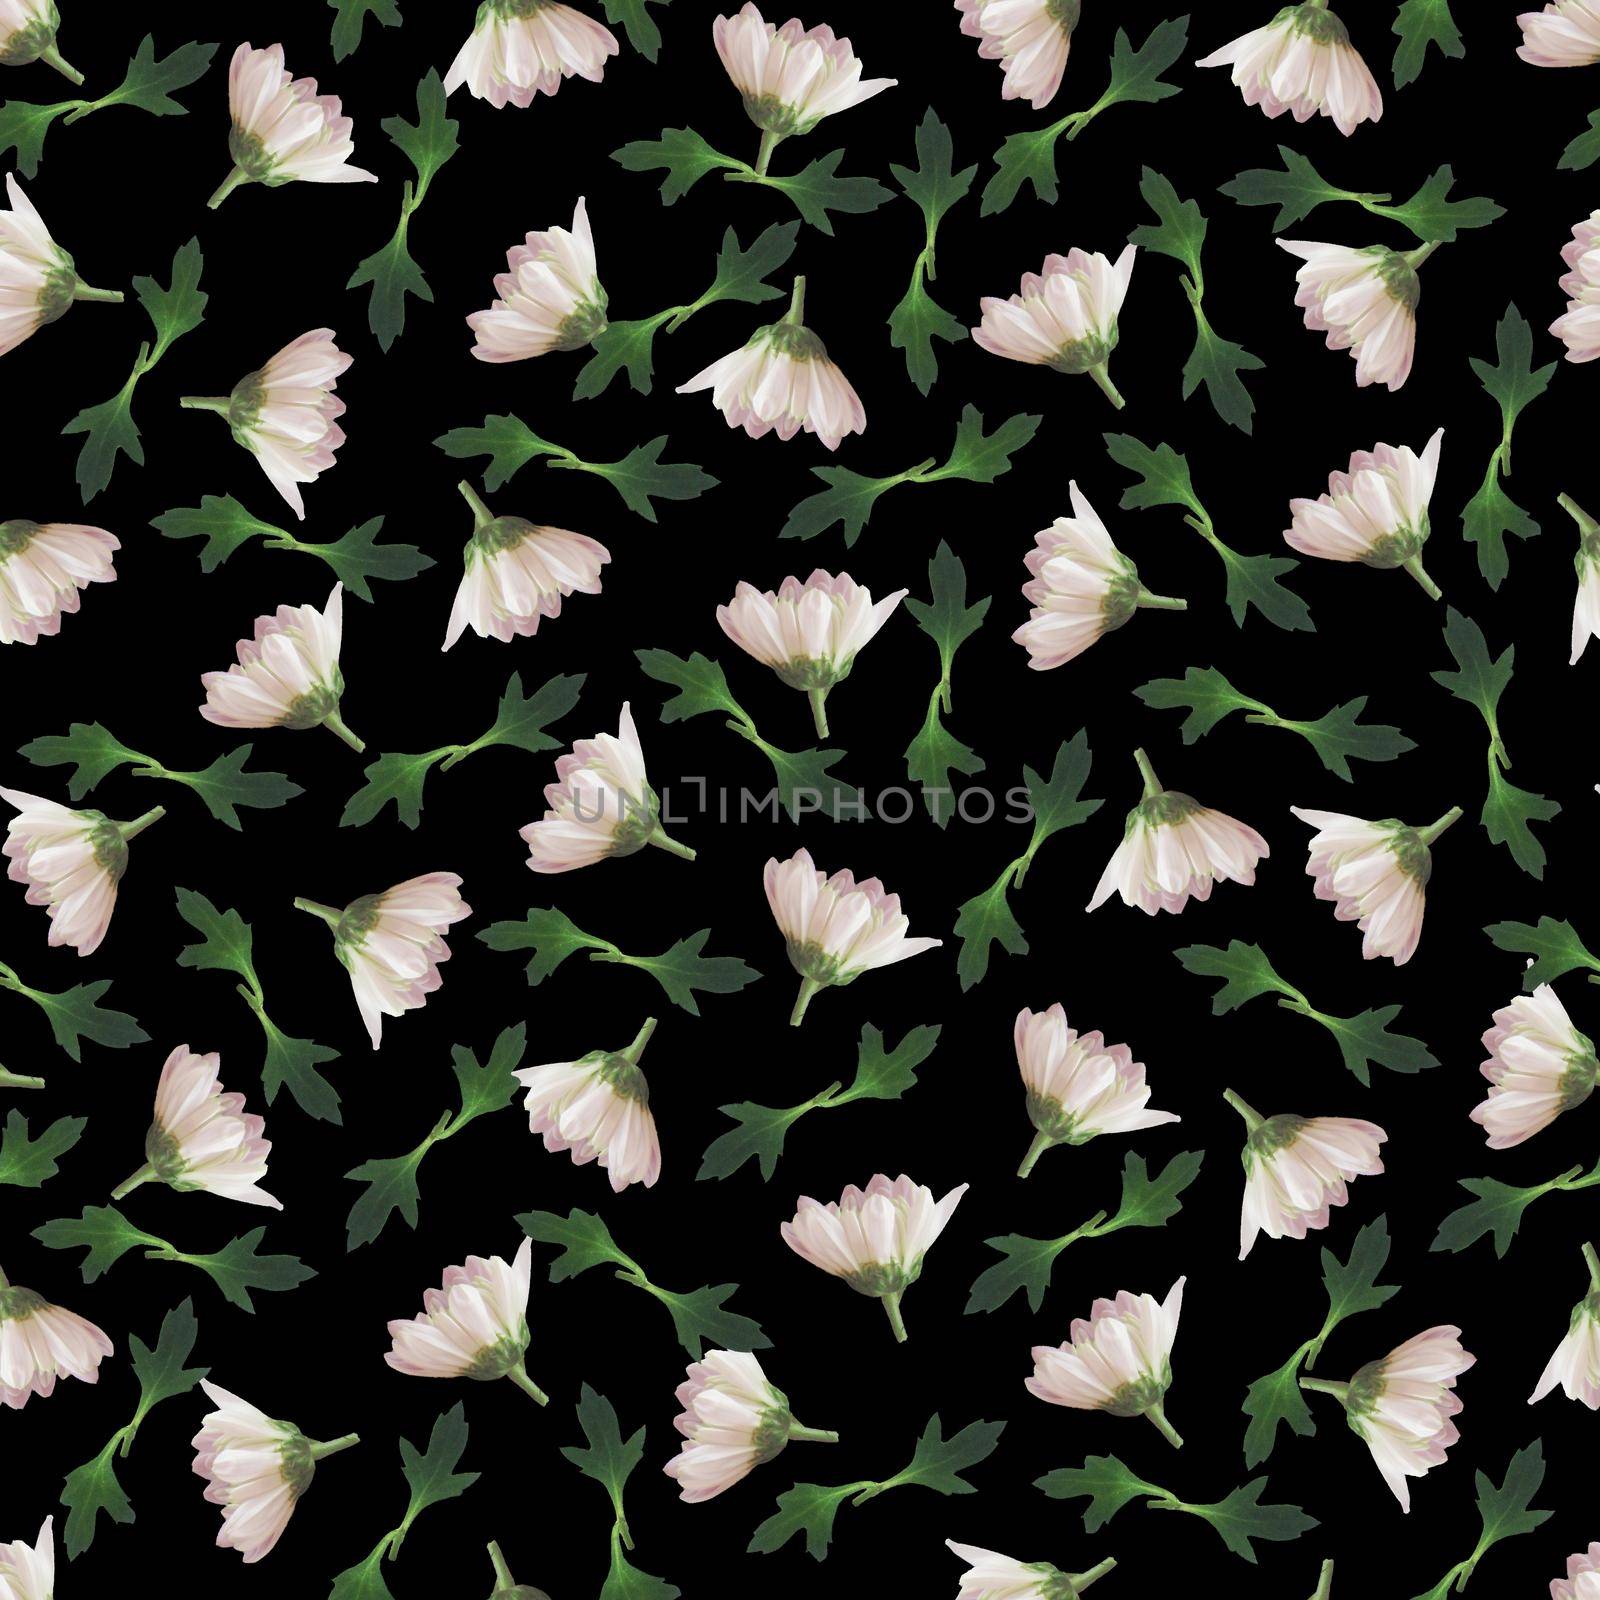 Photo and Digital Seamless Pattern with Nature Chrysanthemums Flowers. Digital Mixed Media Artwork. Endless Motif for Textile Decor and Design.